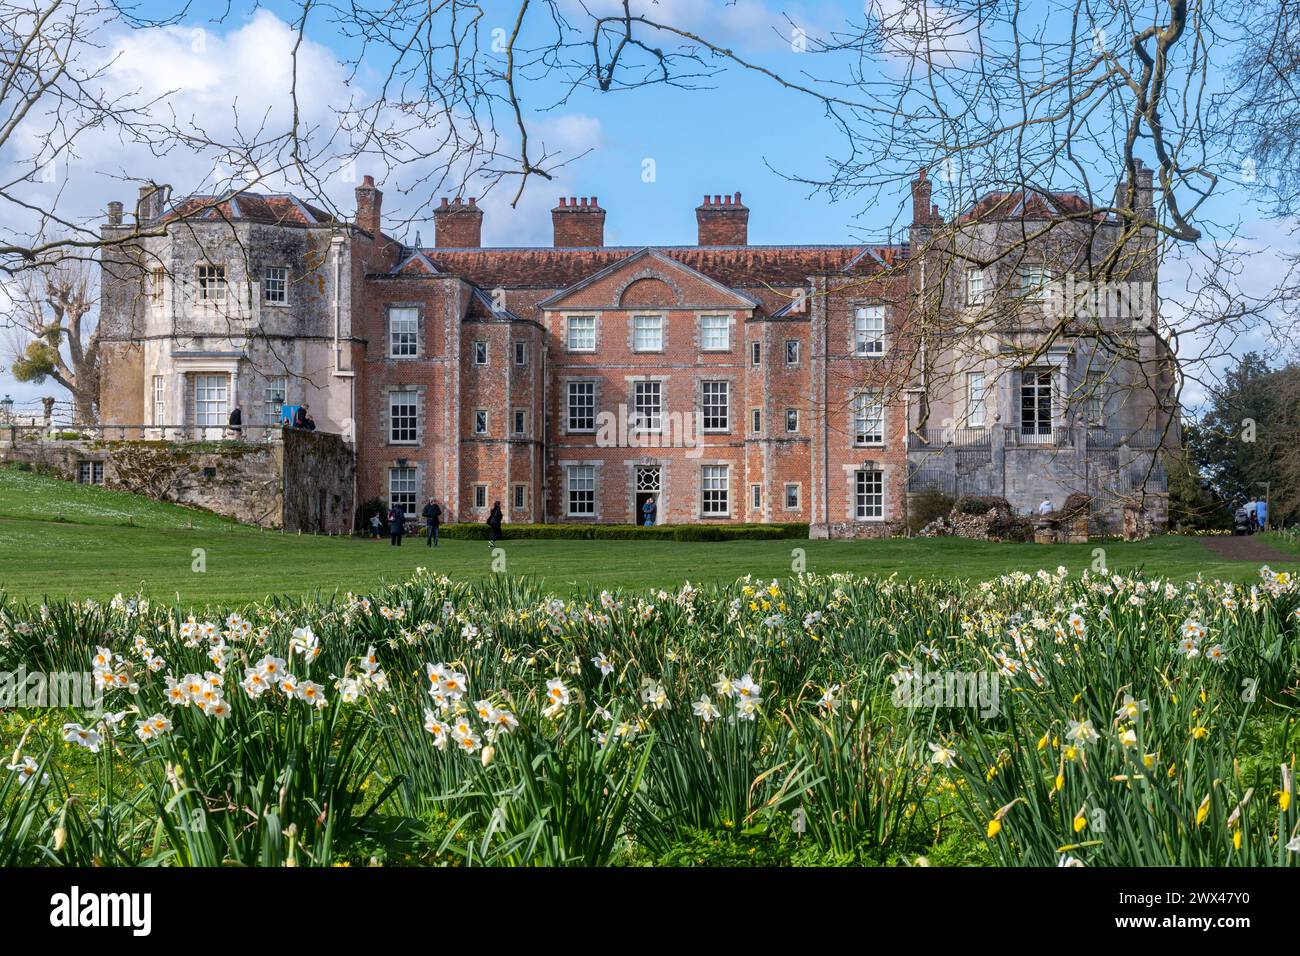 Mottisfont Abbey historic hous, garden and country estate, Spring view with daffodils in flower, Hampshire, England, UK, during March Stock Photo